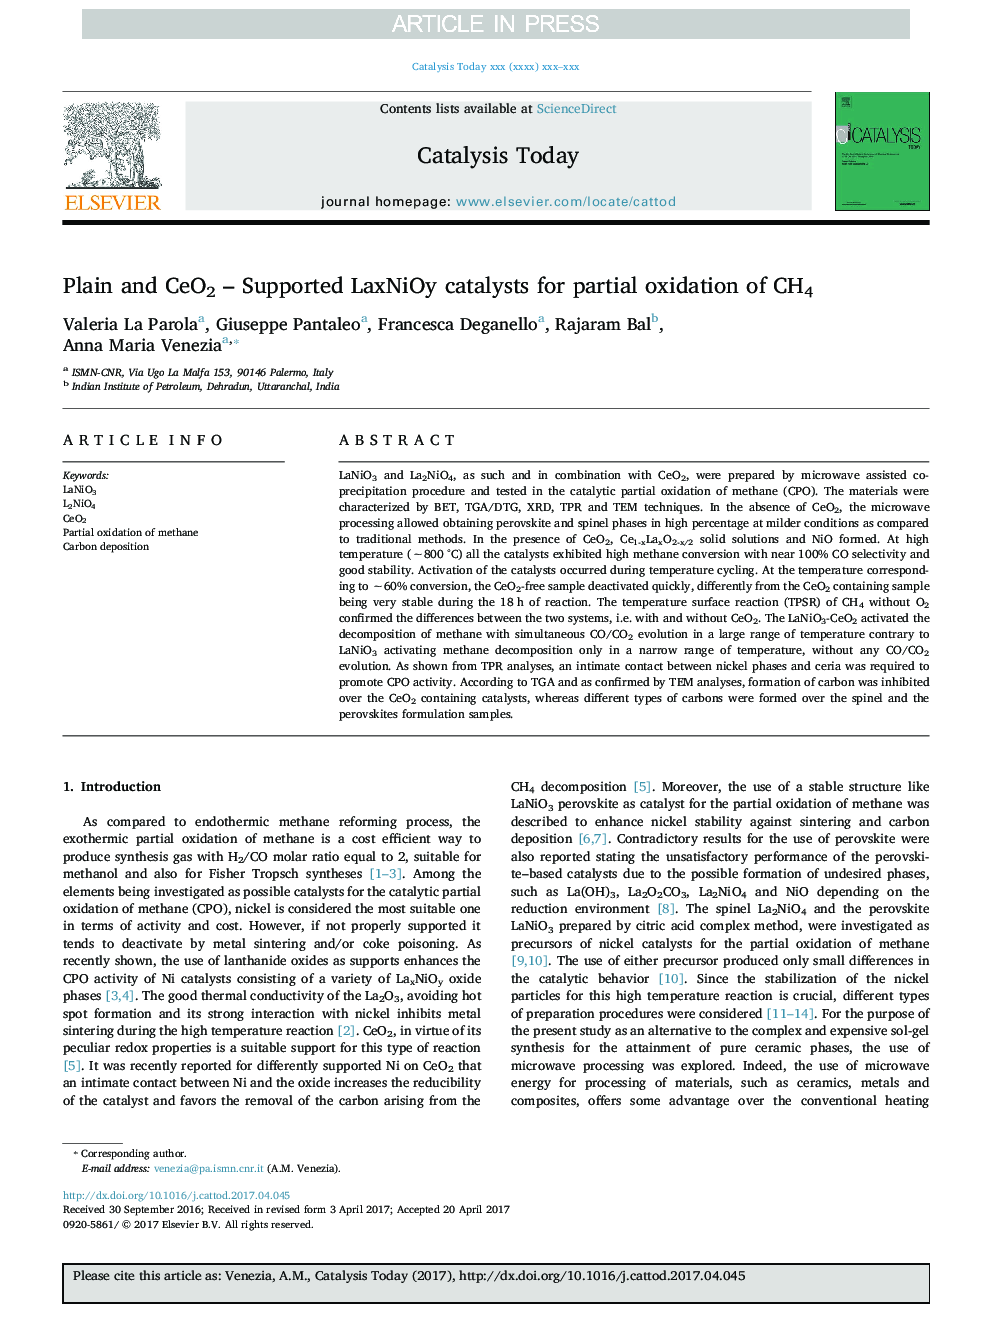 Plain and CeO2 - Supported LaxNiOy catalysts for partial oxidation of CH4